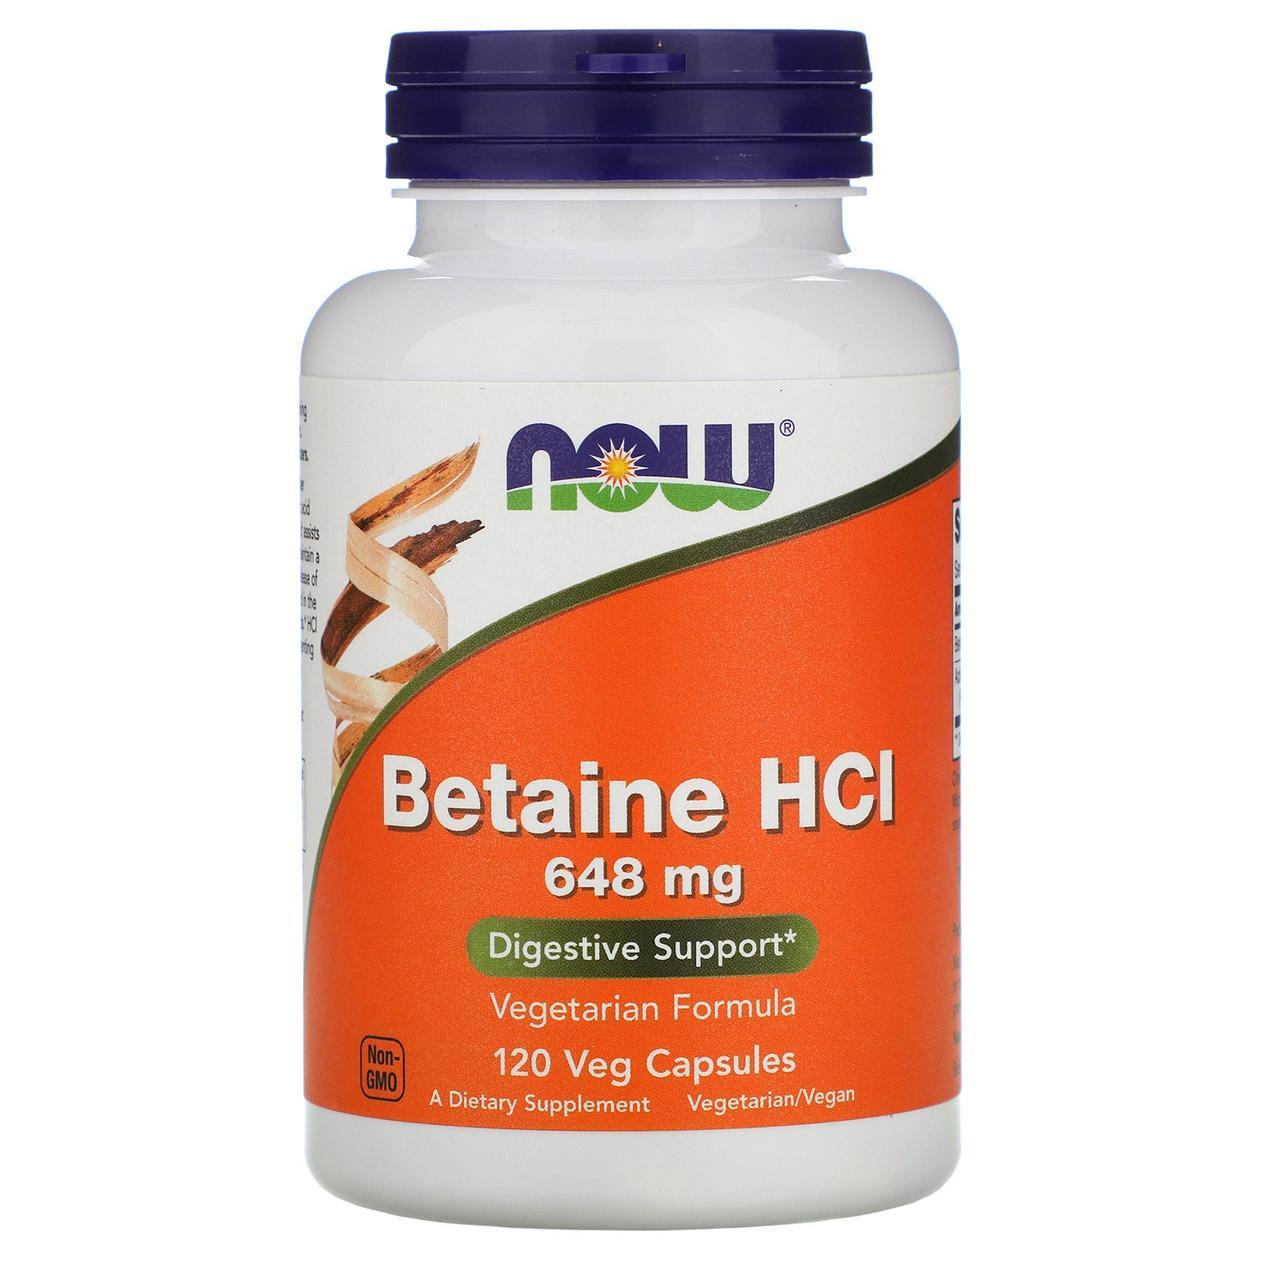 Бетаина гидрохлорид NOW Foods Betaine HCL 648 mg 120 VCaps,  ml, Now. Suplementos especiales. 